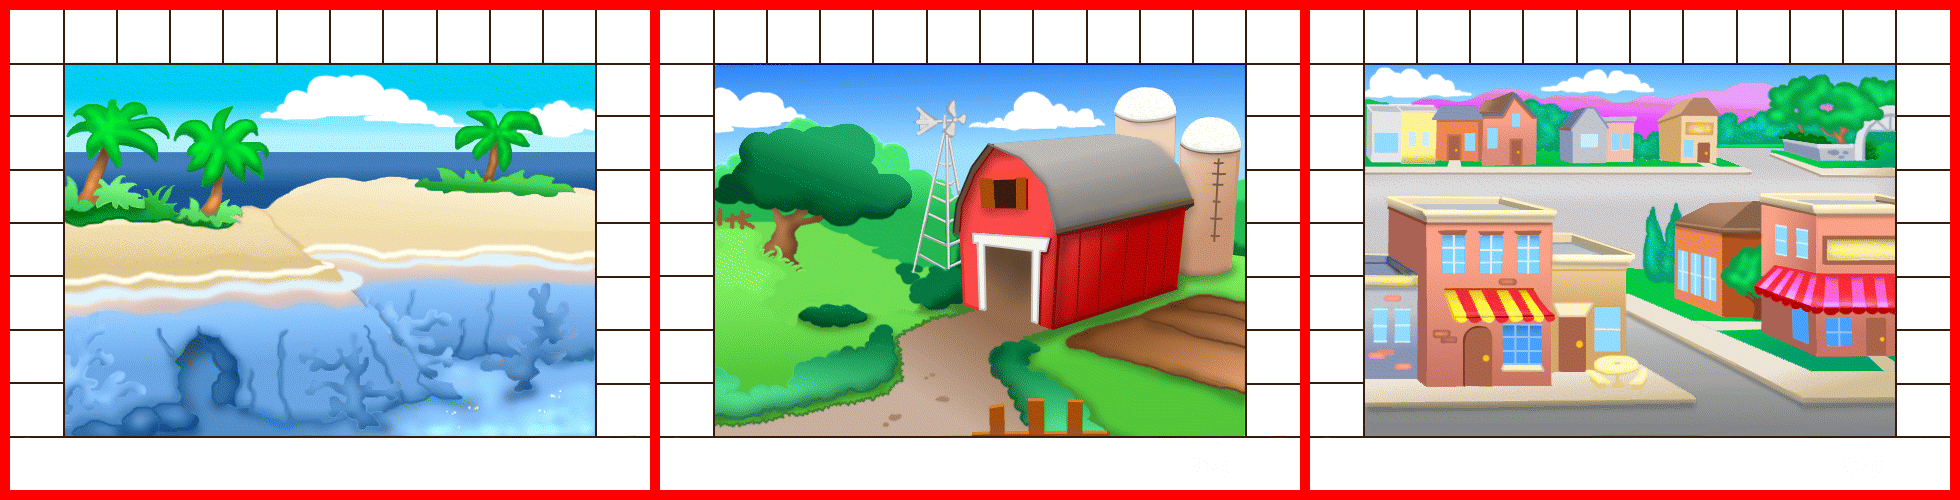 Fisher-Price Ready For School: Toddler - Backgrounds